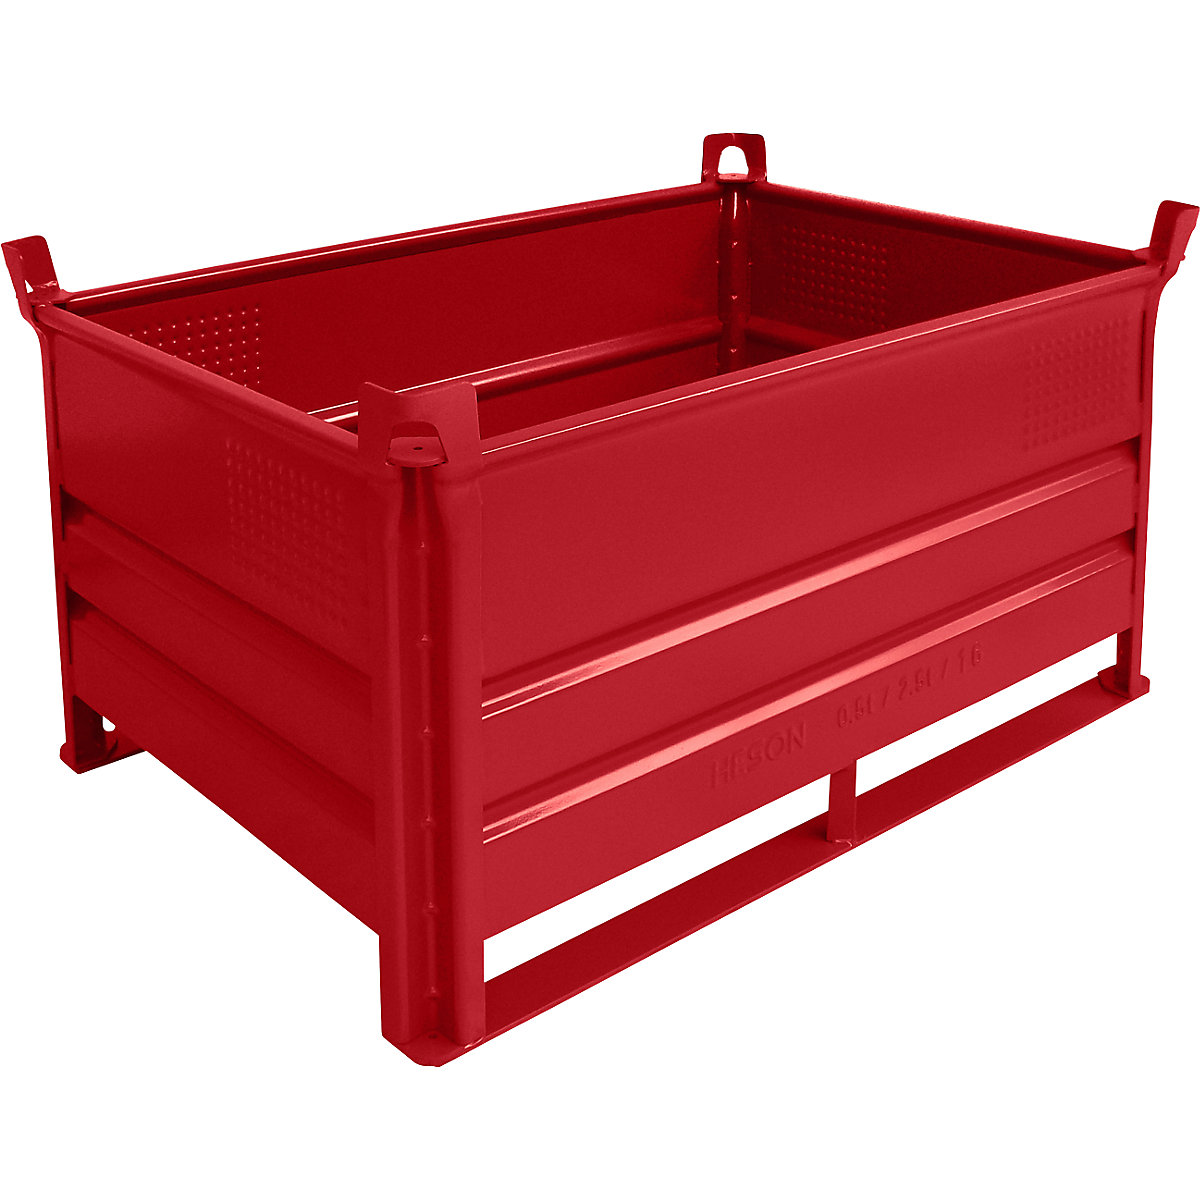 Stacking container with runners – Heson, LxW 1200 x 800 mm, max. load 2000 kg, red, 10+ items-3